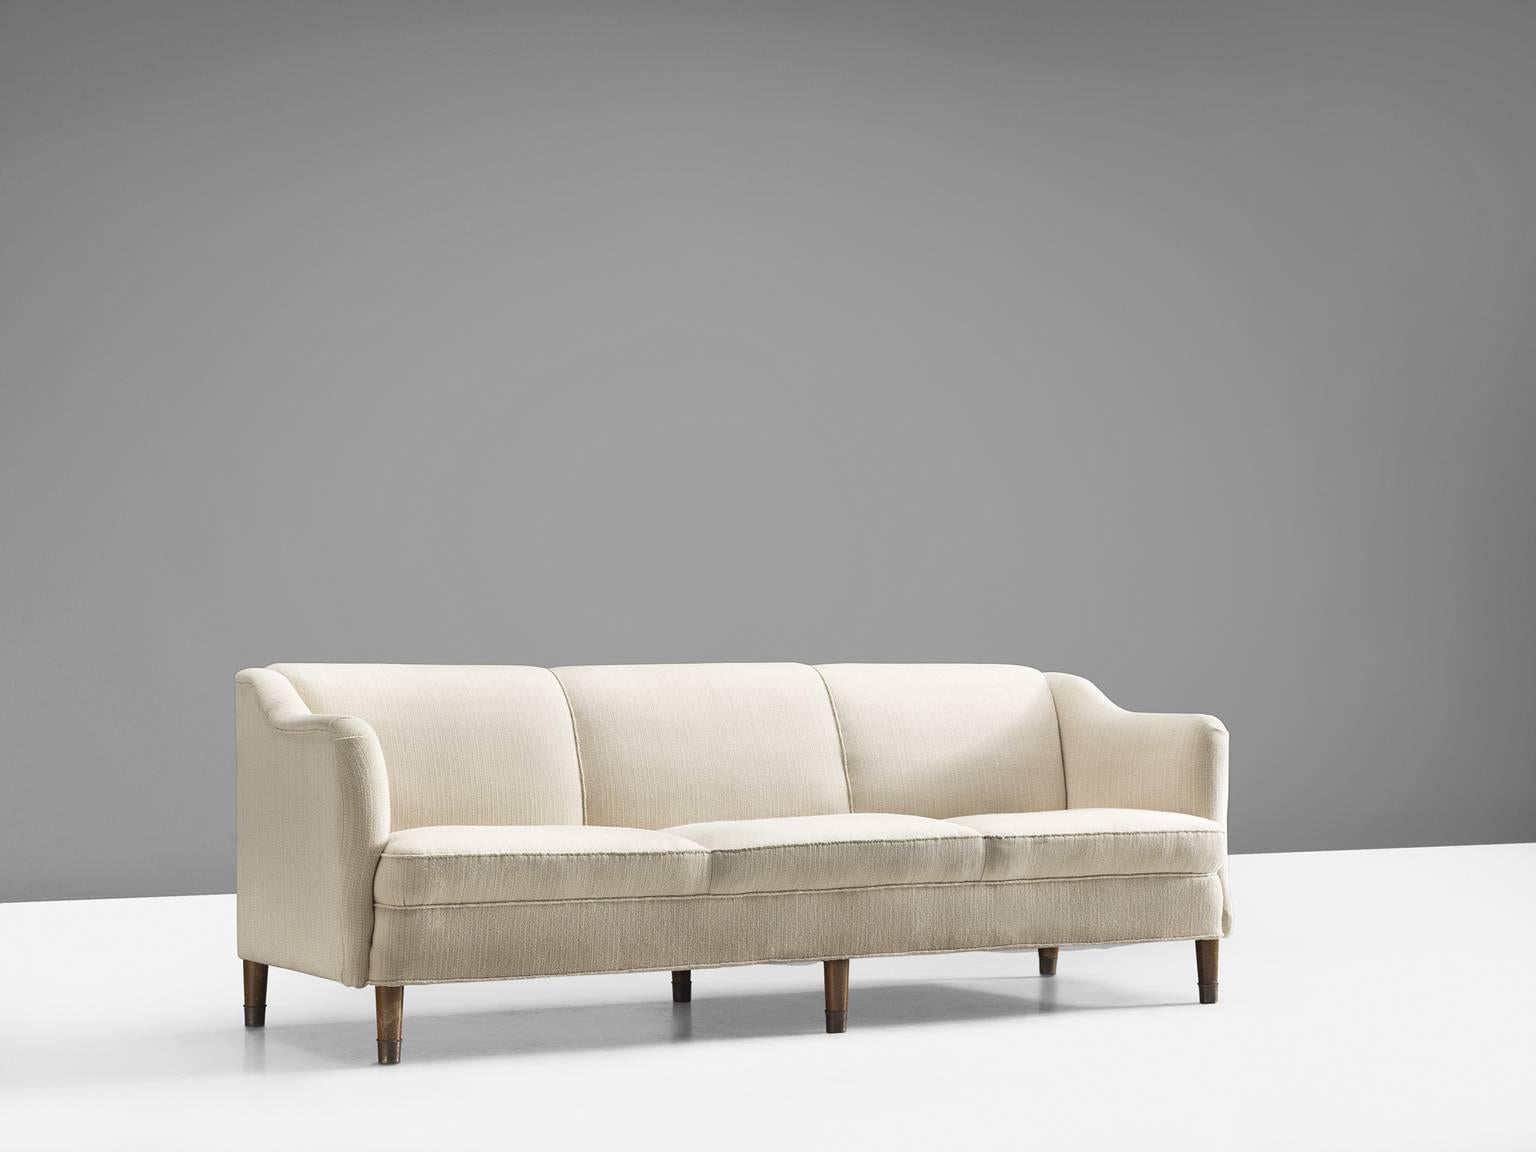 Three-seat sofa, in walnut and white fabric, Denmark, 1950s. 

This sofa shows exquisite Danish craftsmanship and aesthetics. The settee features a soft, curving back and comfortable cushions in both the seat and back, as can be expected from